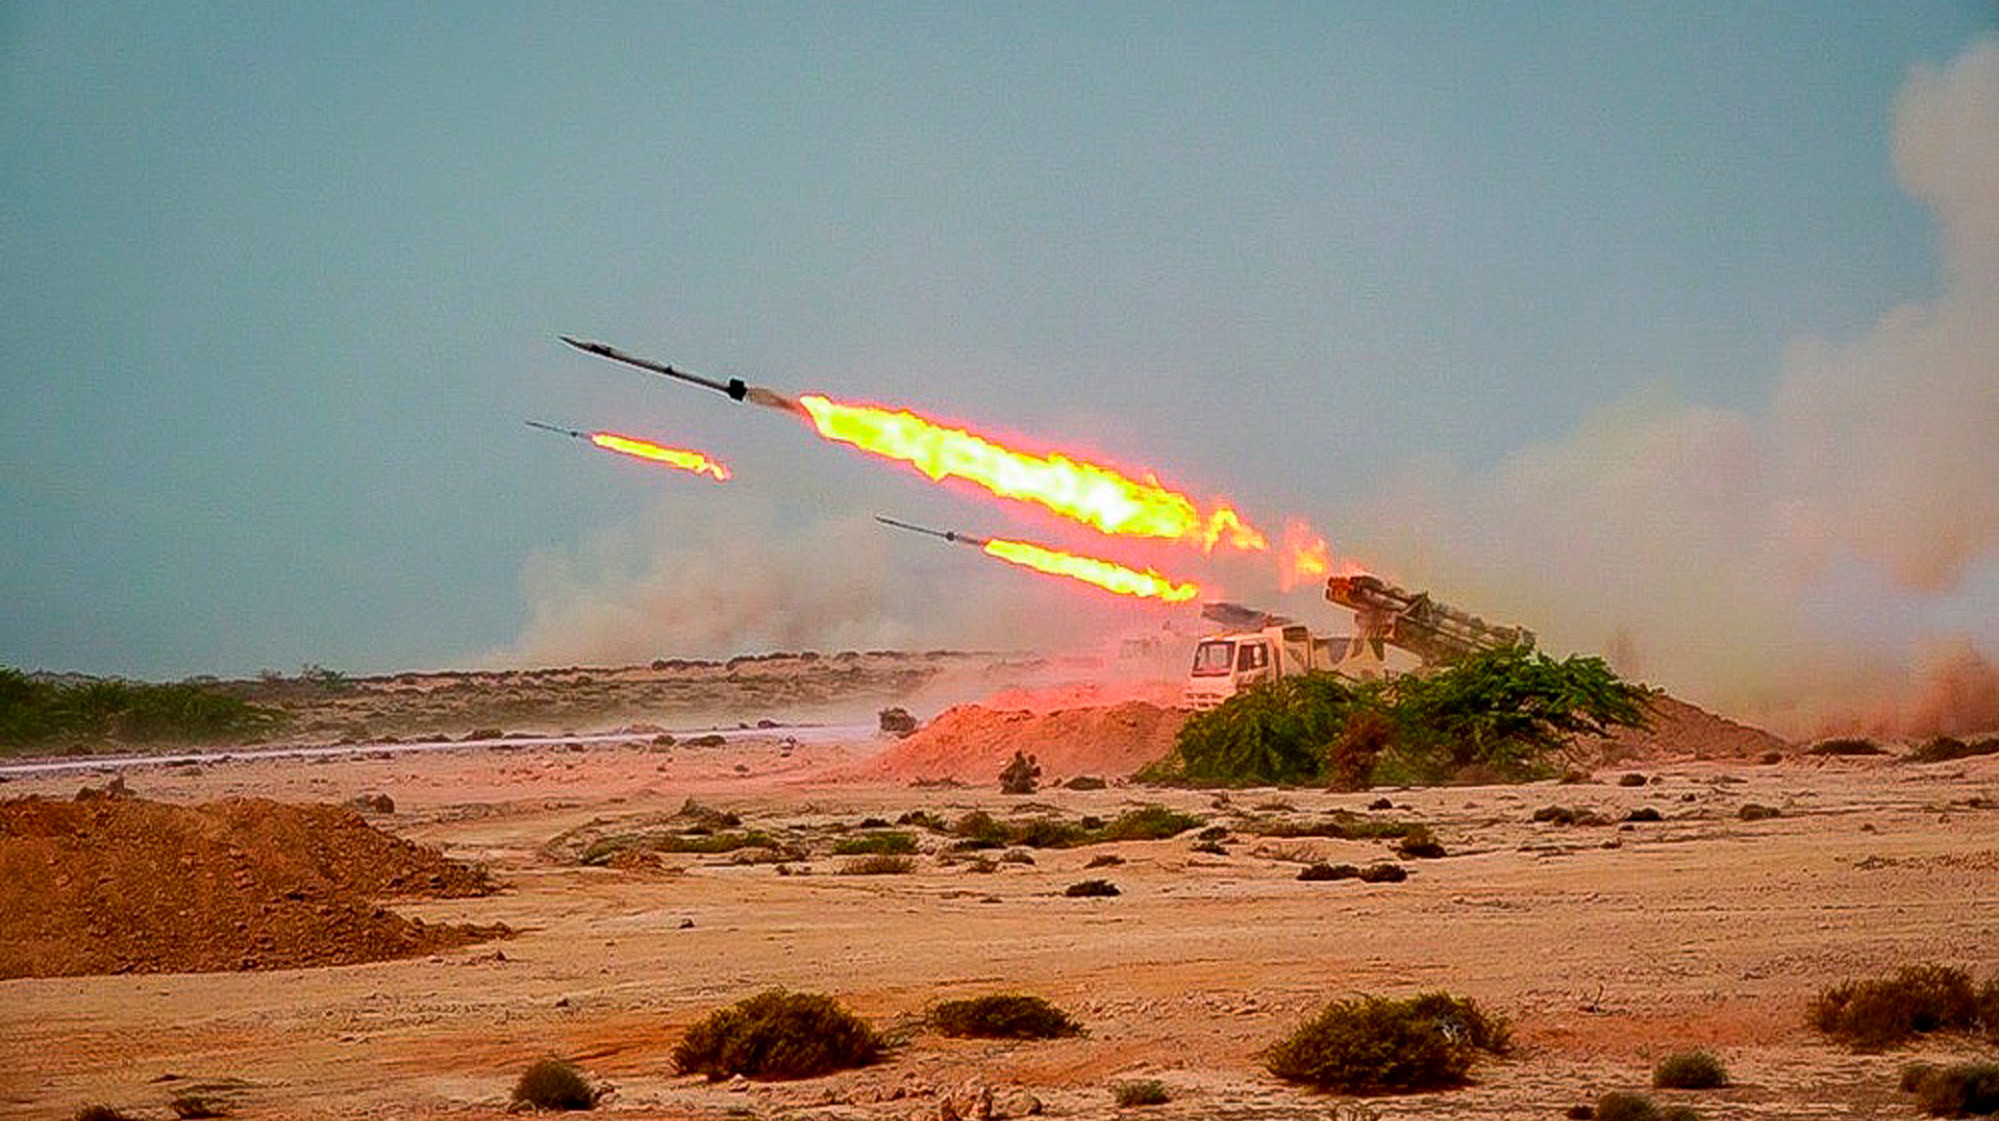 IRGC multiple launch rocket systems firing during live-fire exercises in a photo released July 28, 2020. This photo was released by the IRGC and cannot be independently verified (Photo: Sepahnews, AP)